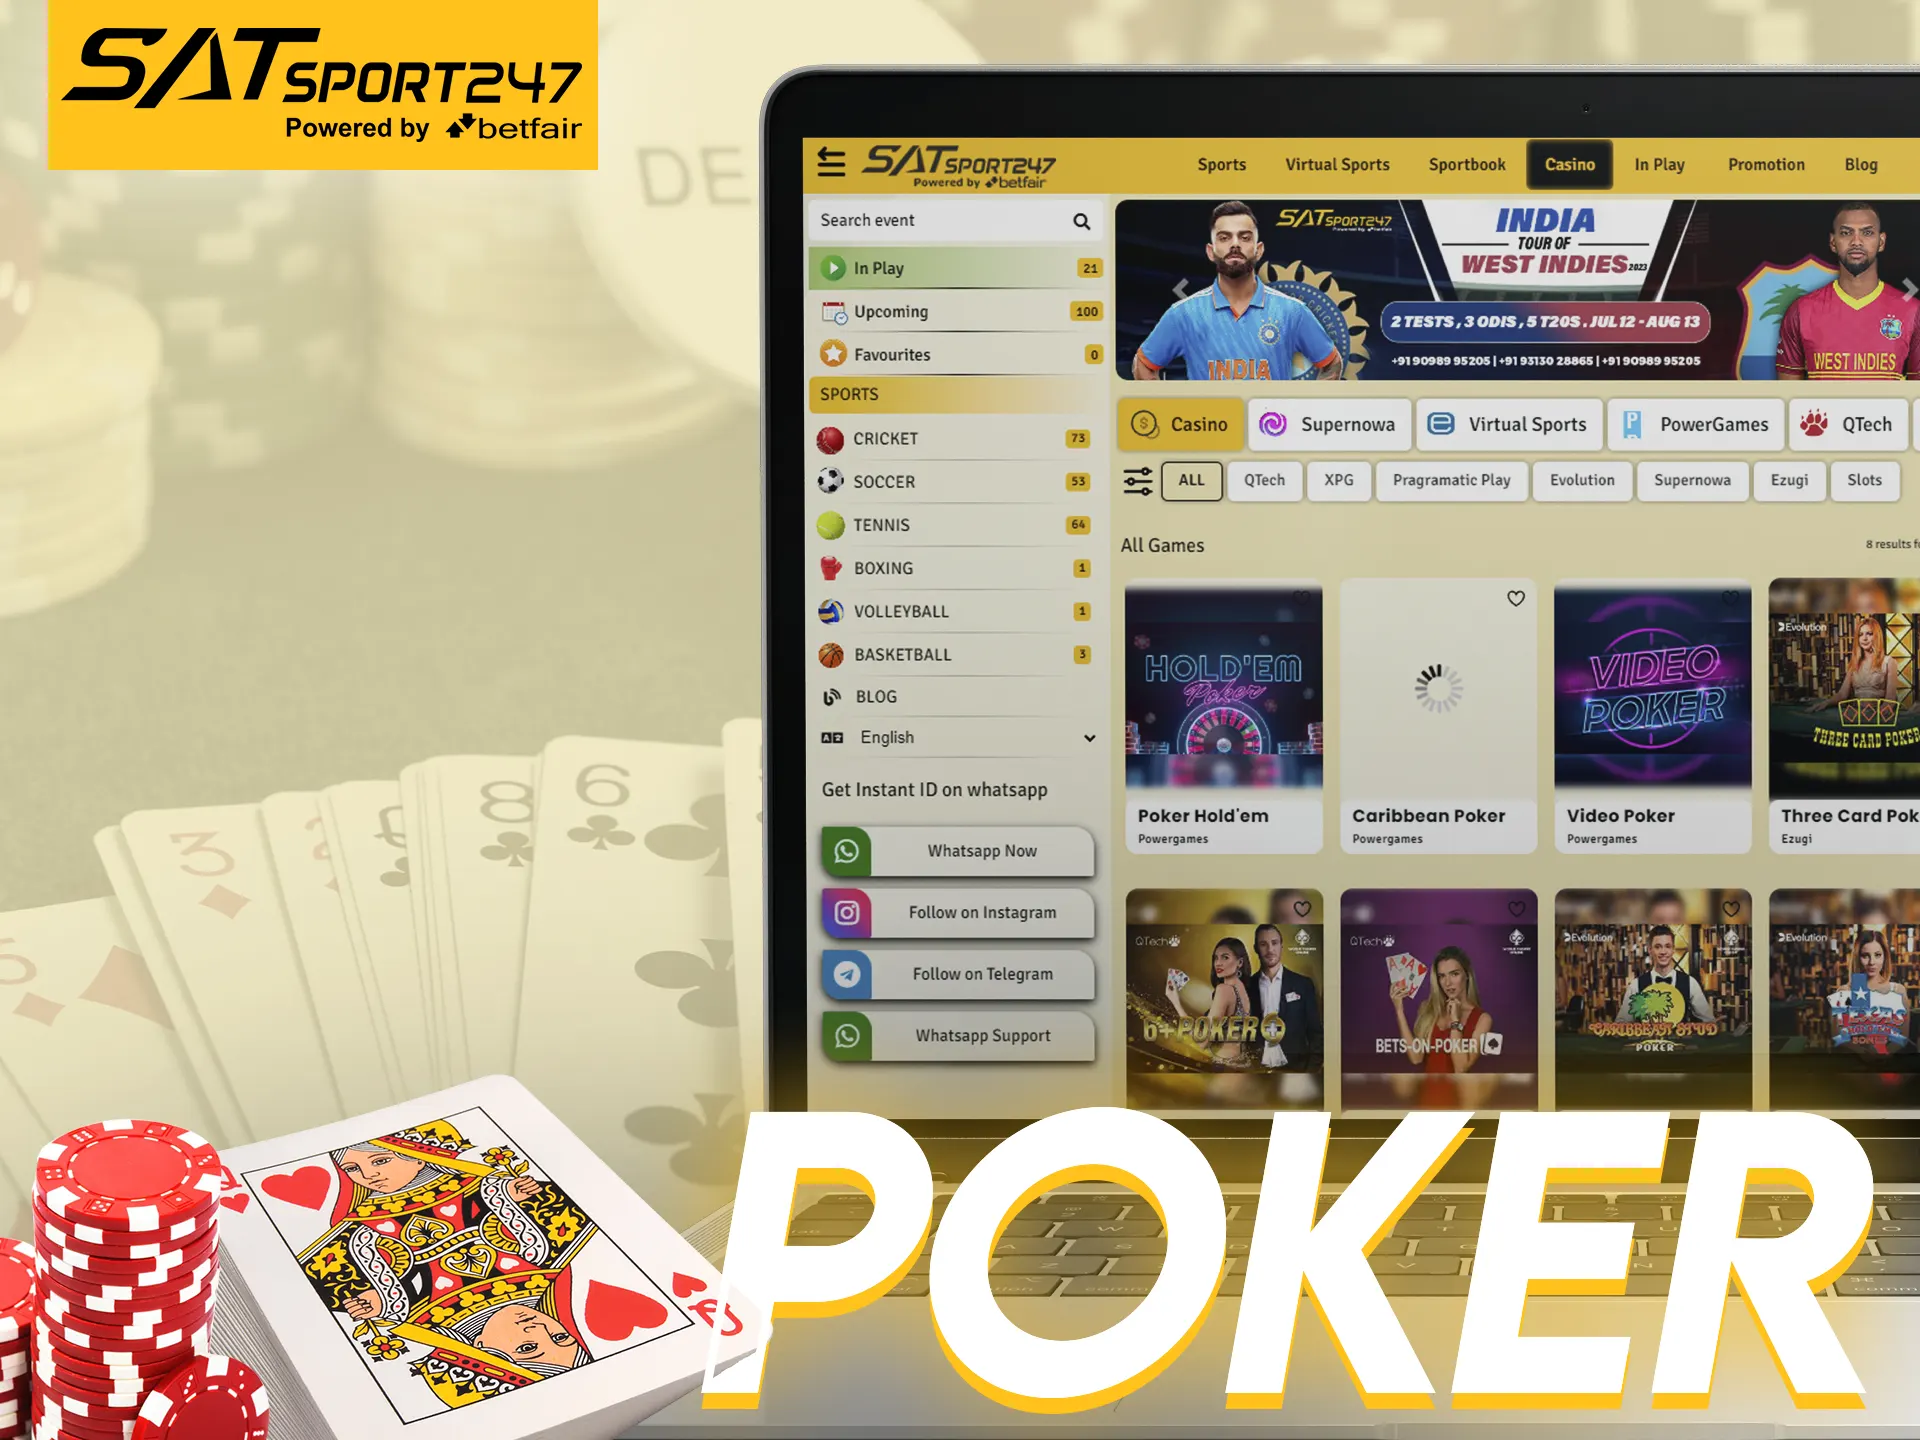 Play poker with Satsport247.